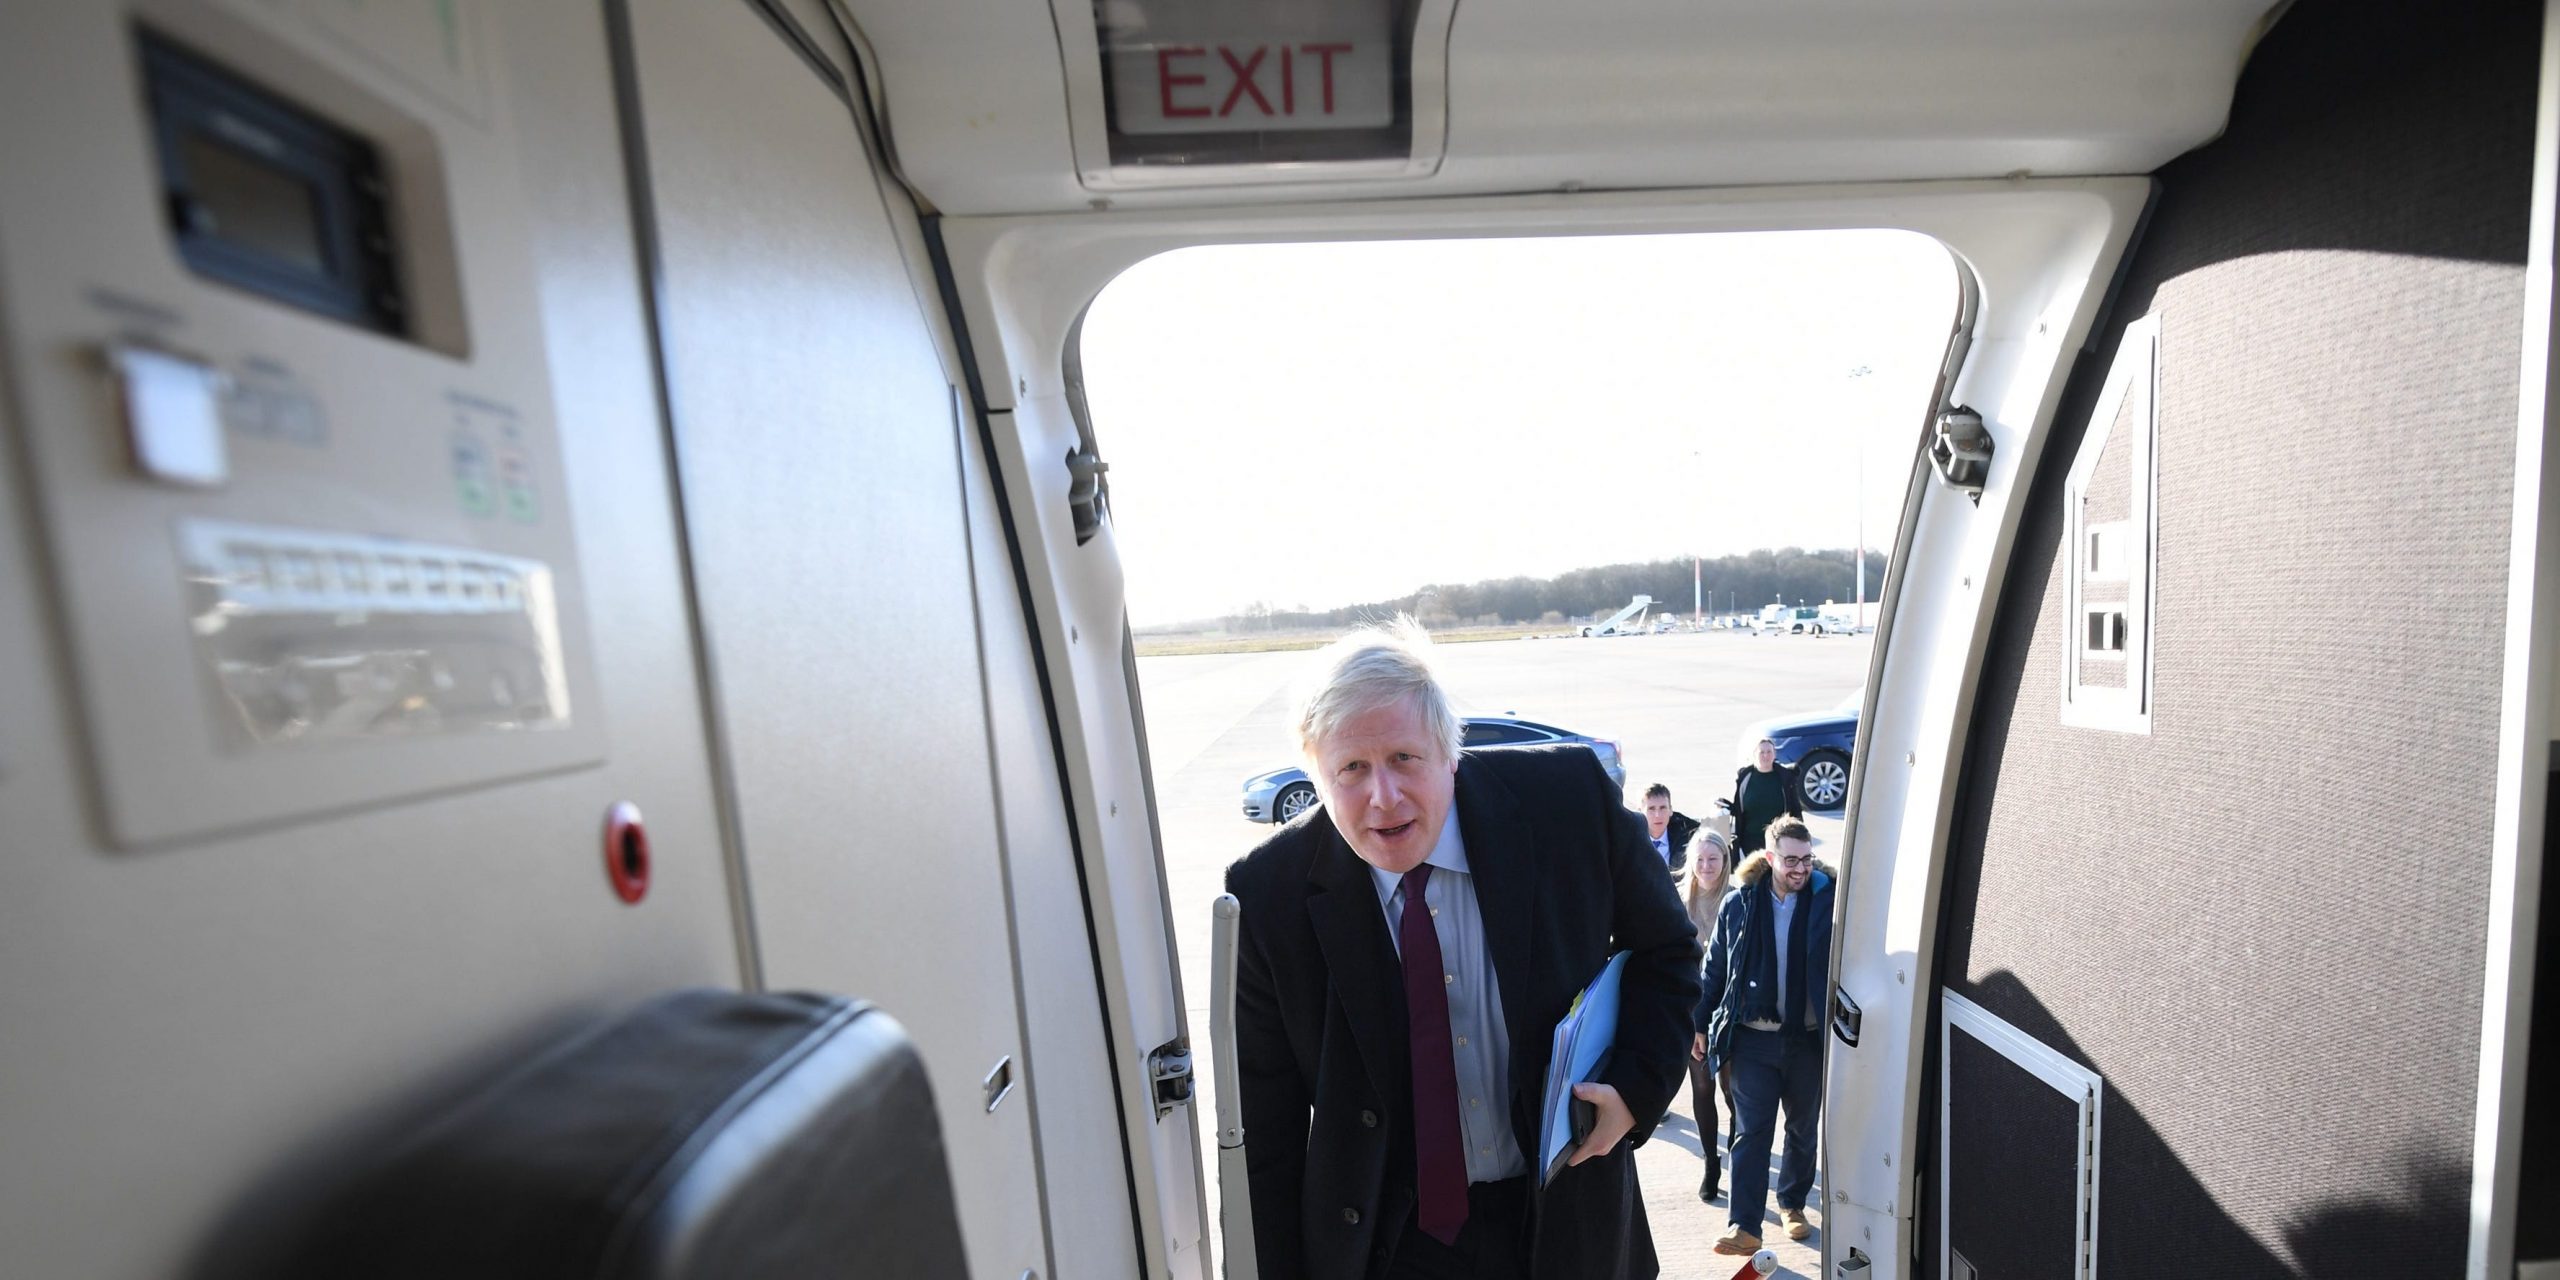 Boris Johnson gets on a plane. There is an exit sign above him.